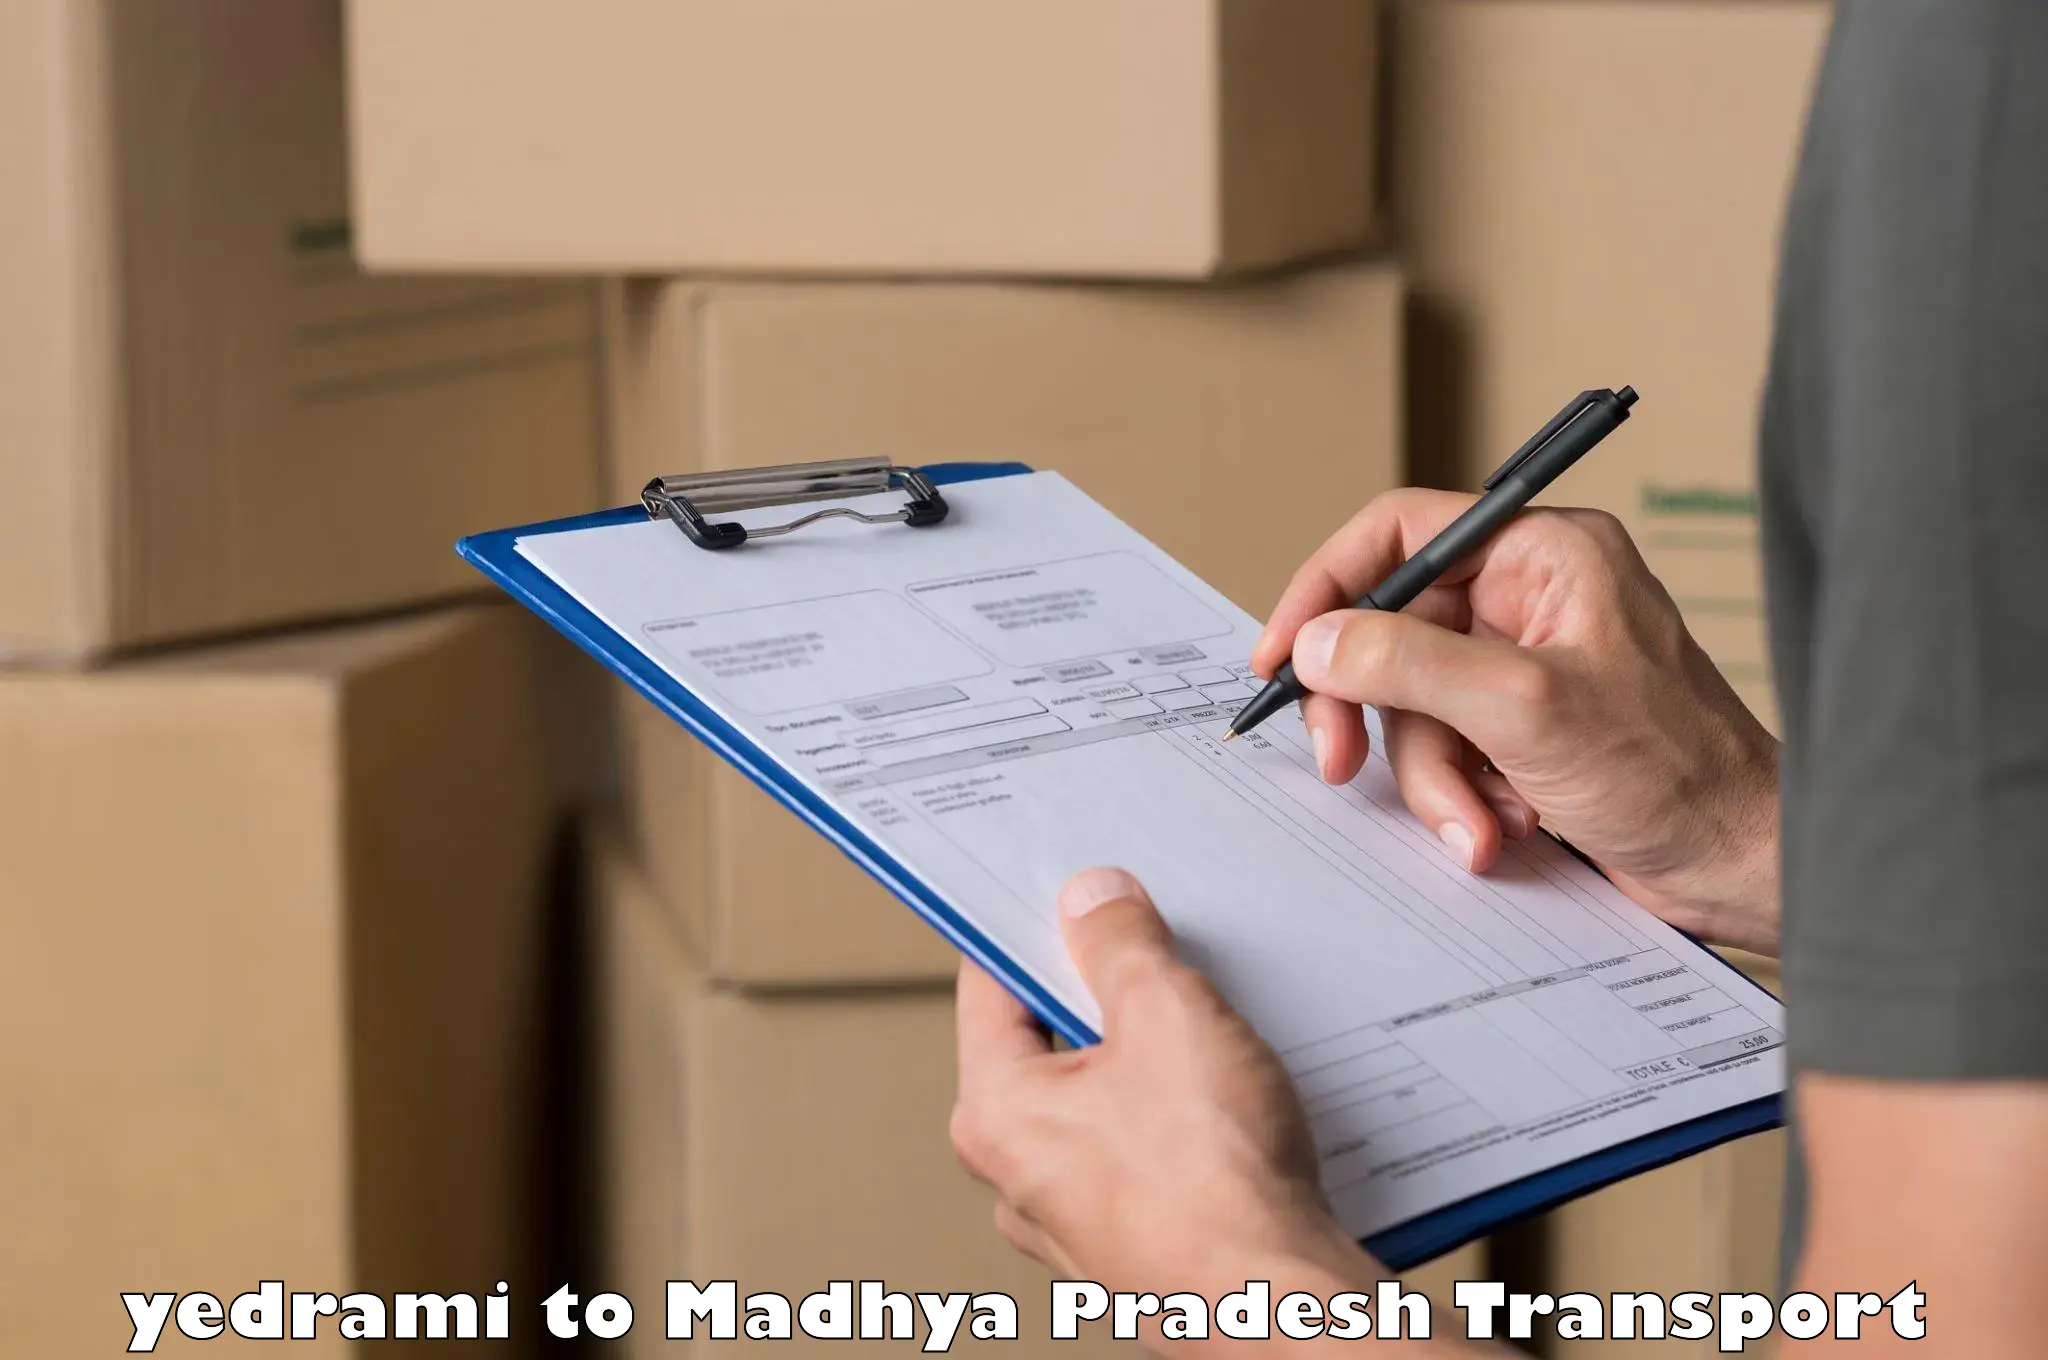 Commercial transport service yedrami to Prithvipur